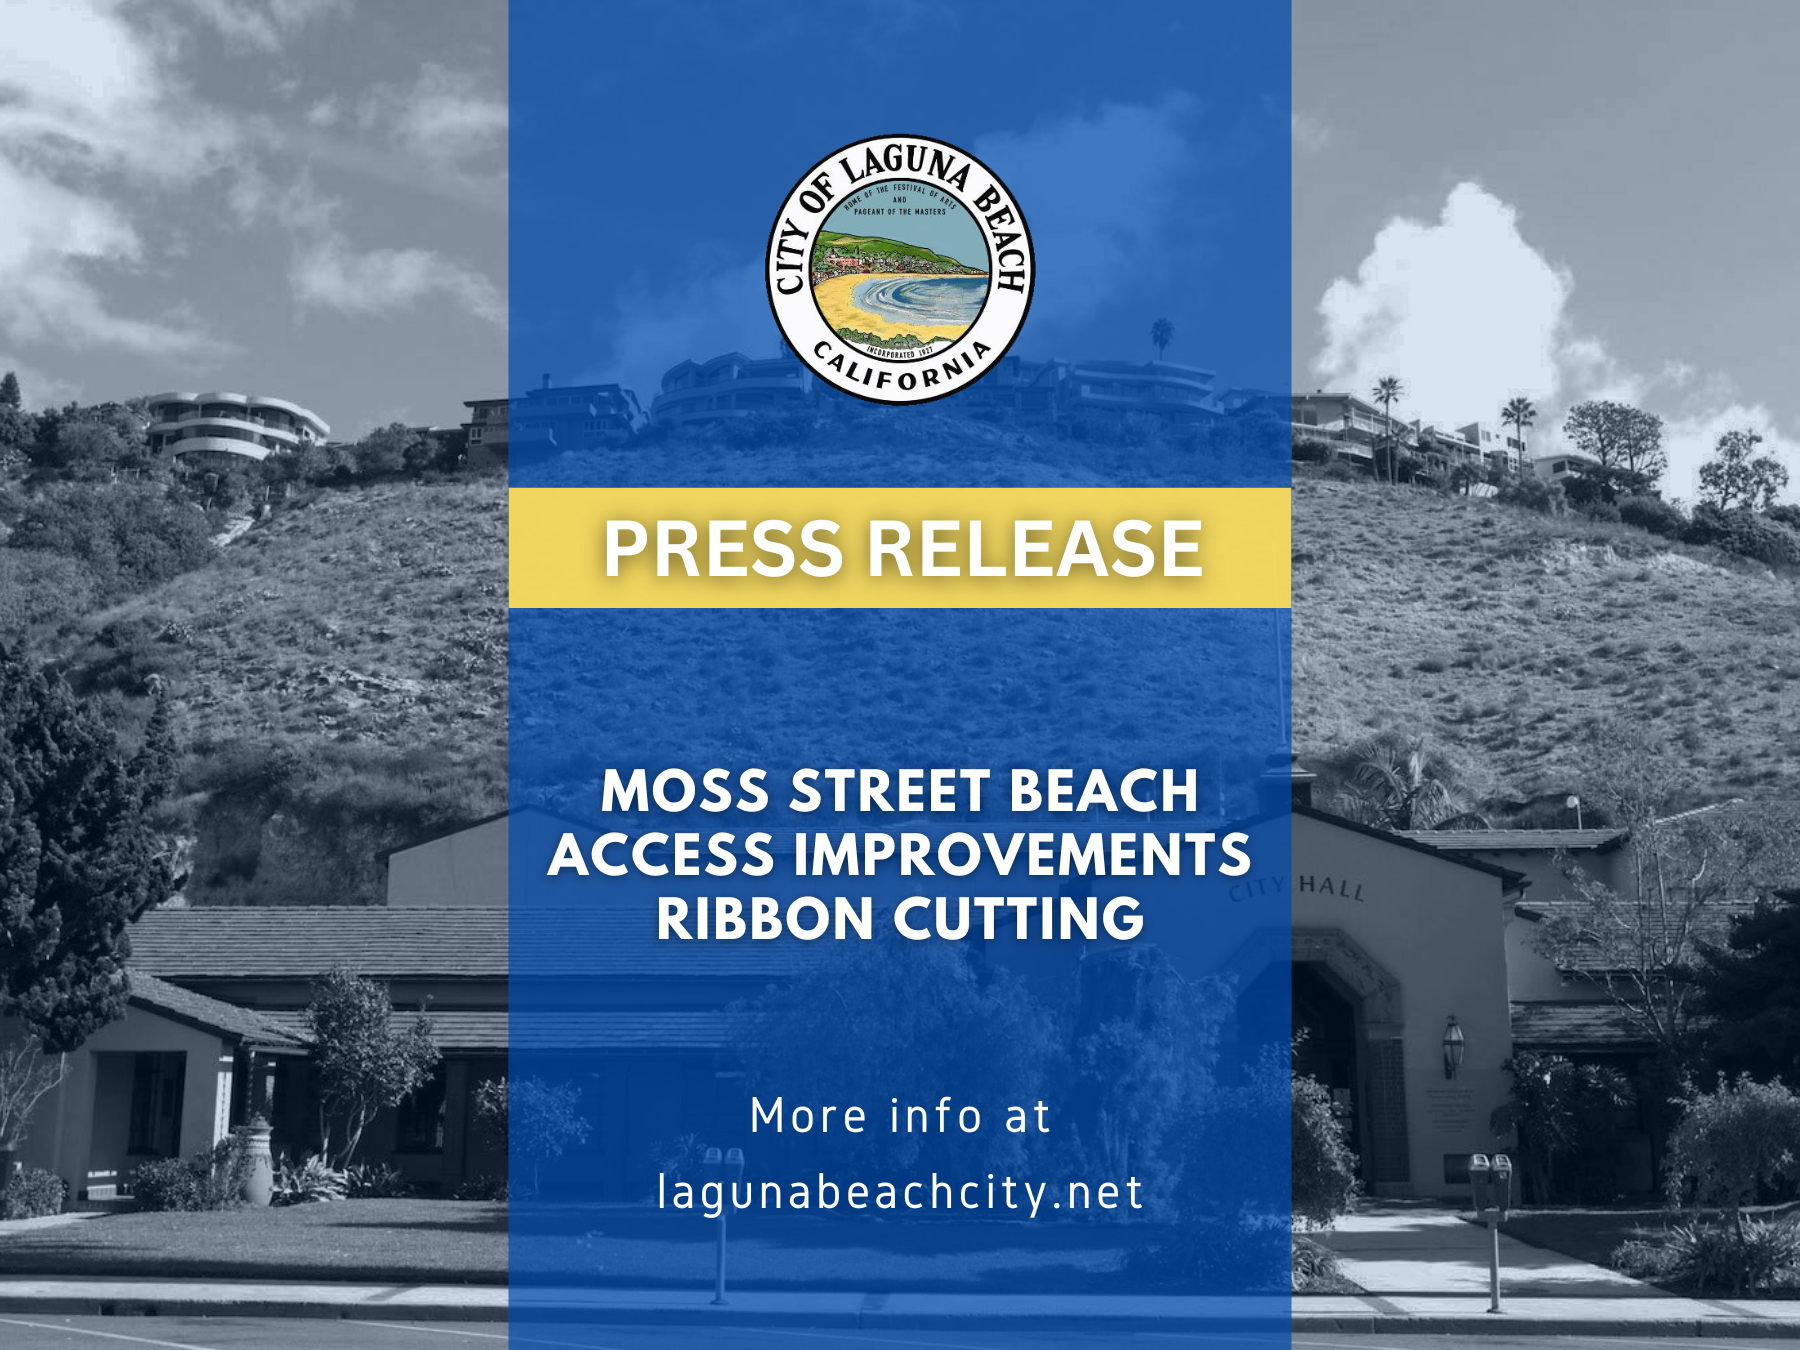 Public Invited to Attend Grand Opening of New Moss Street Beach Access